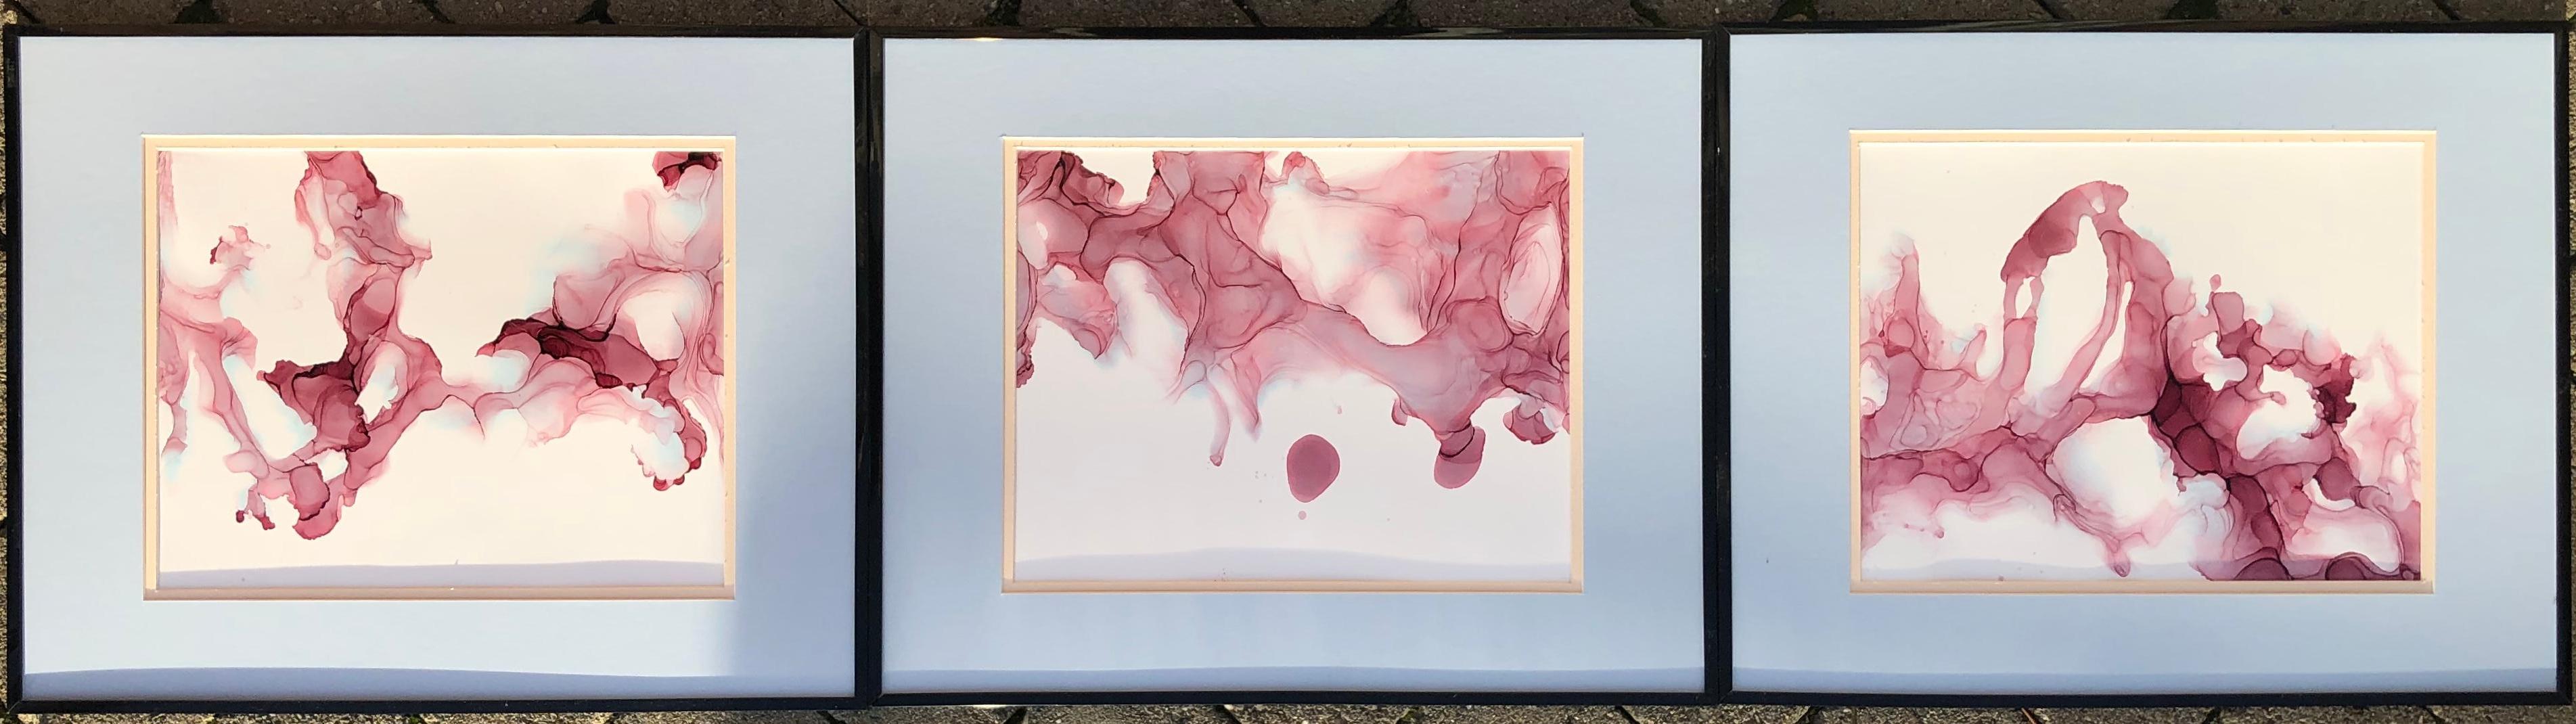 Line of fate-abstraction art, made in pale pink, light blue, rose colored - Art by Mila Akopova